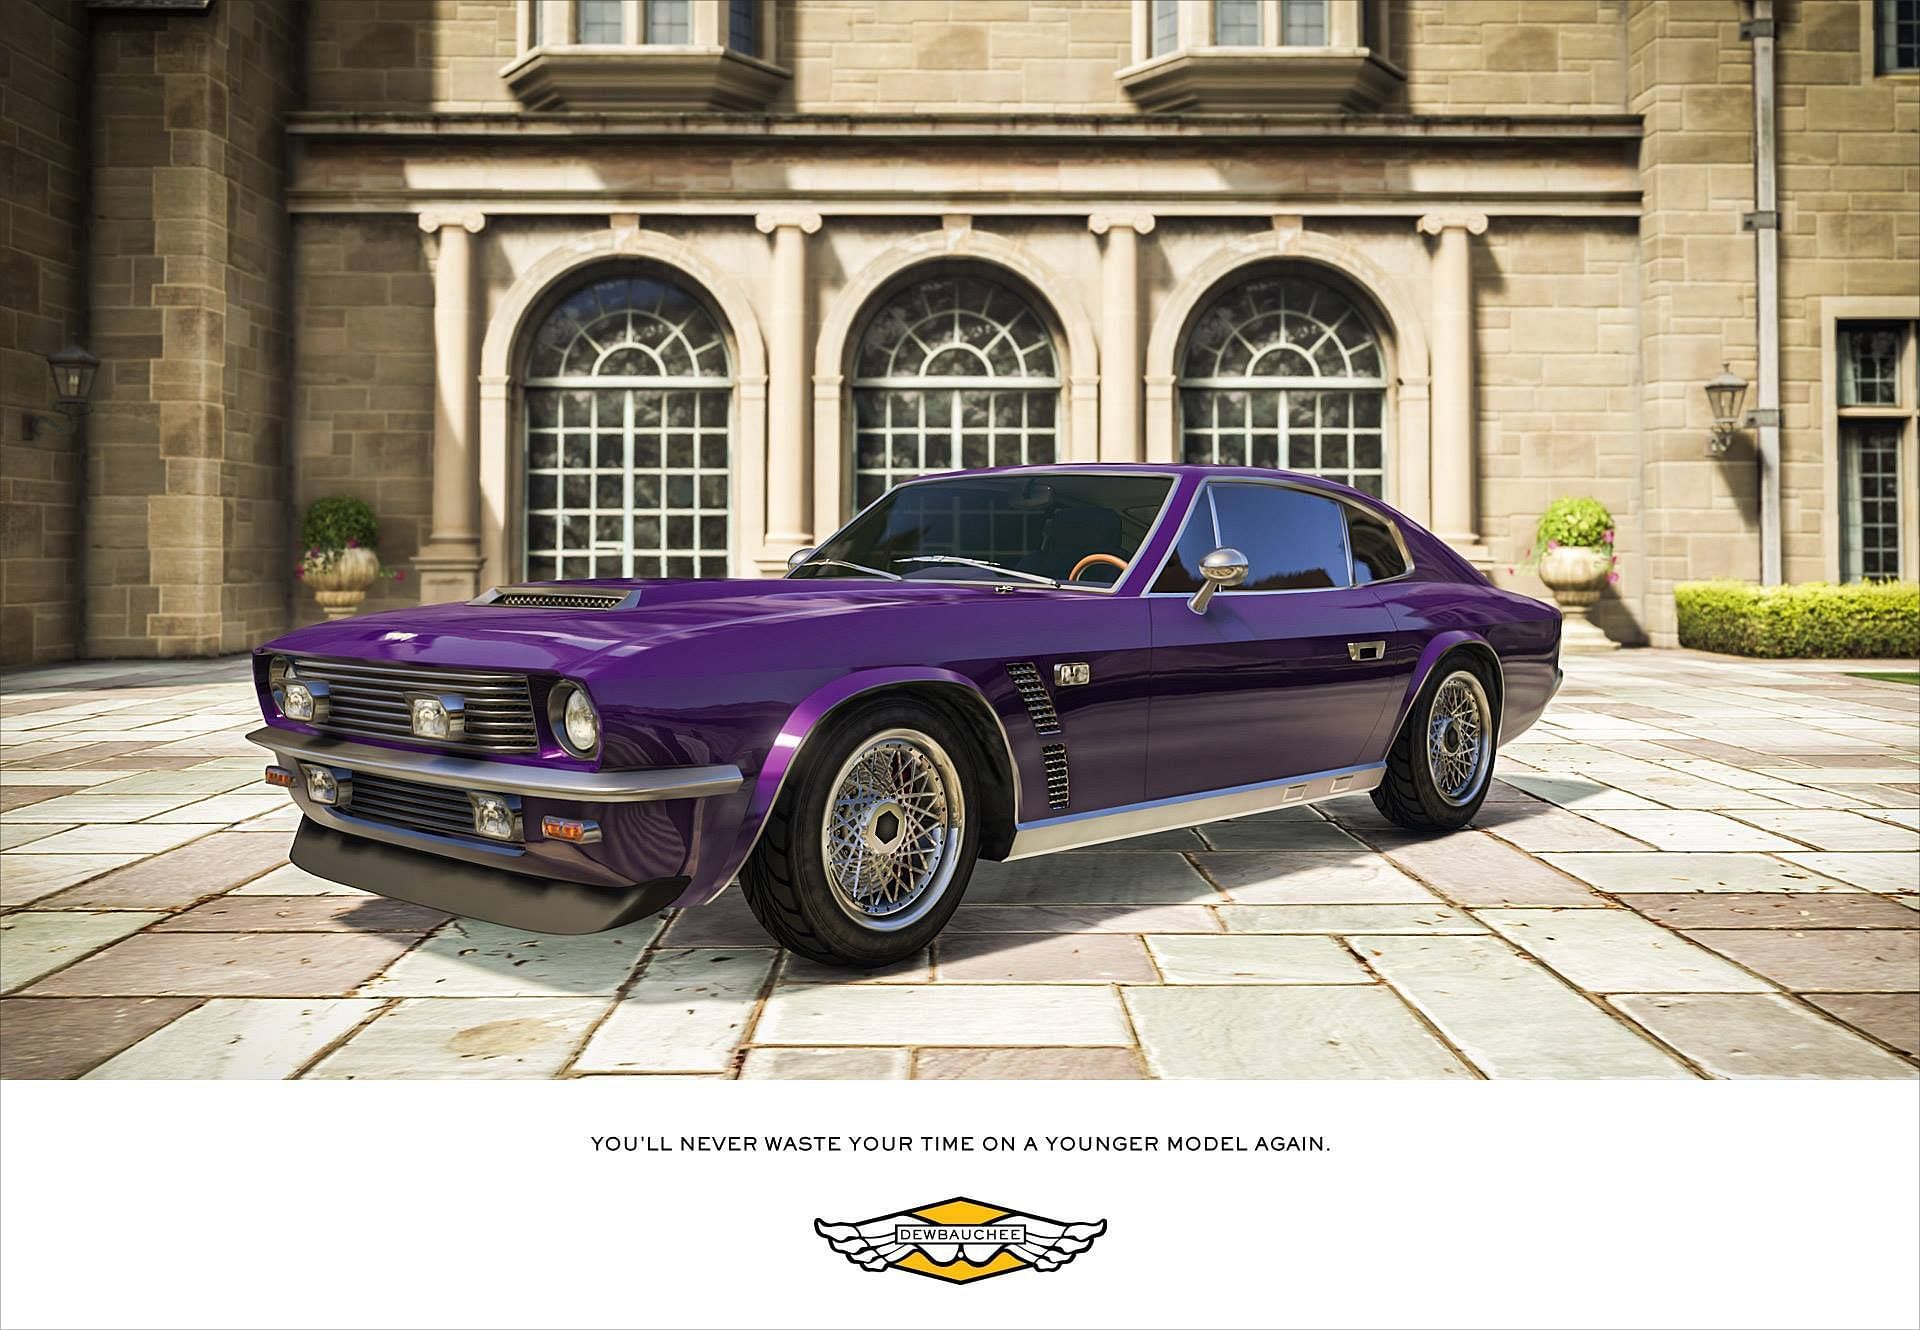 The Sports Classic variant of the Dewbauchee Rapid GT (Image via Twitter @ Rockstar Games)